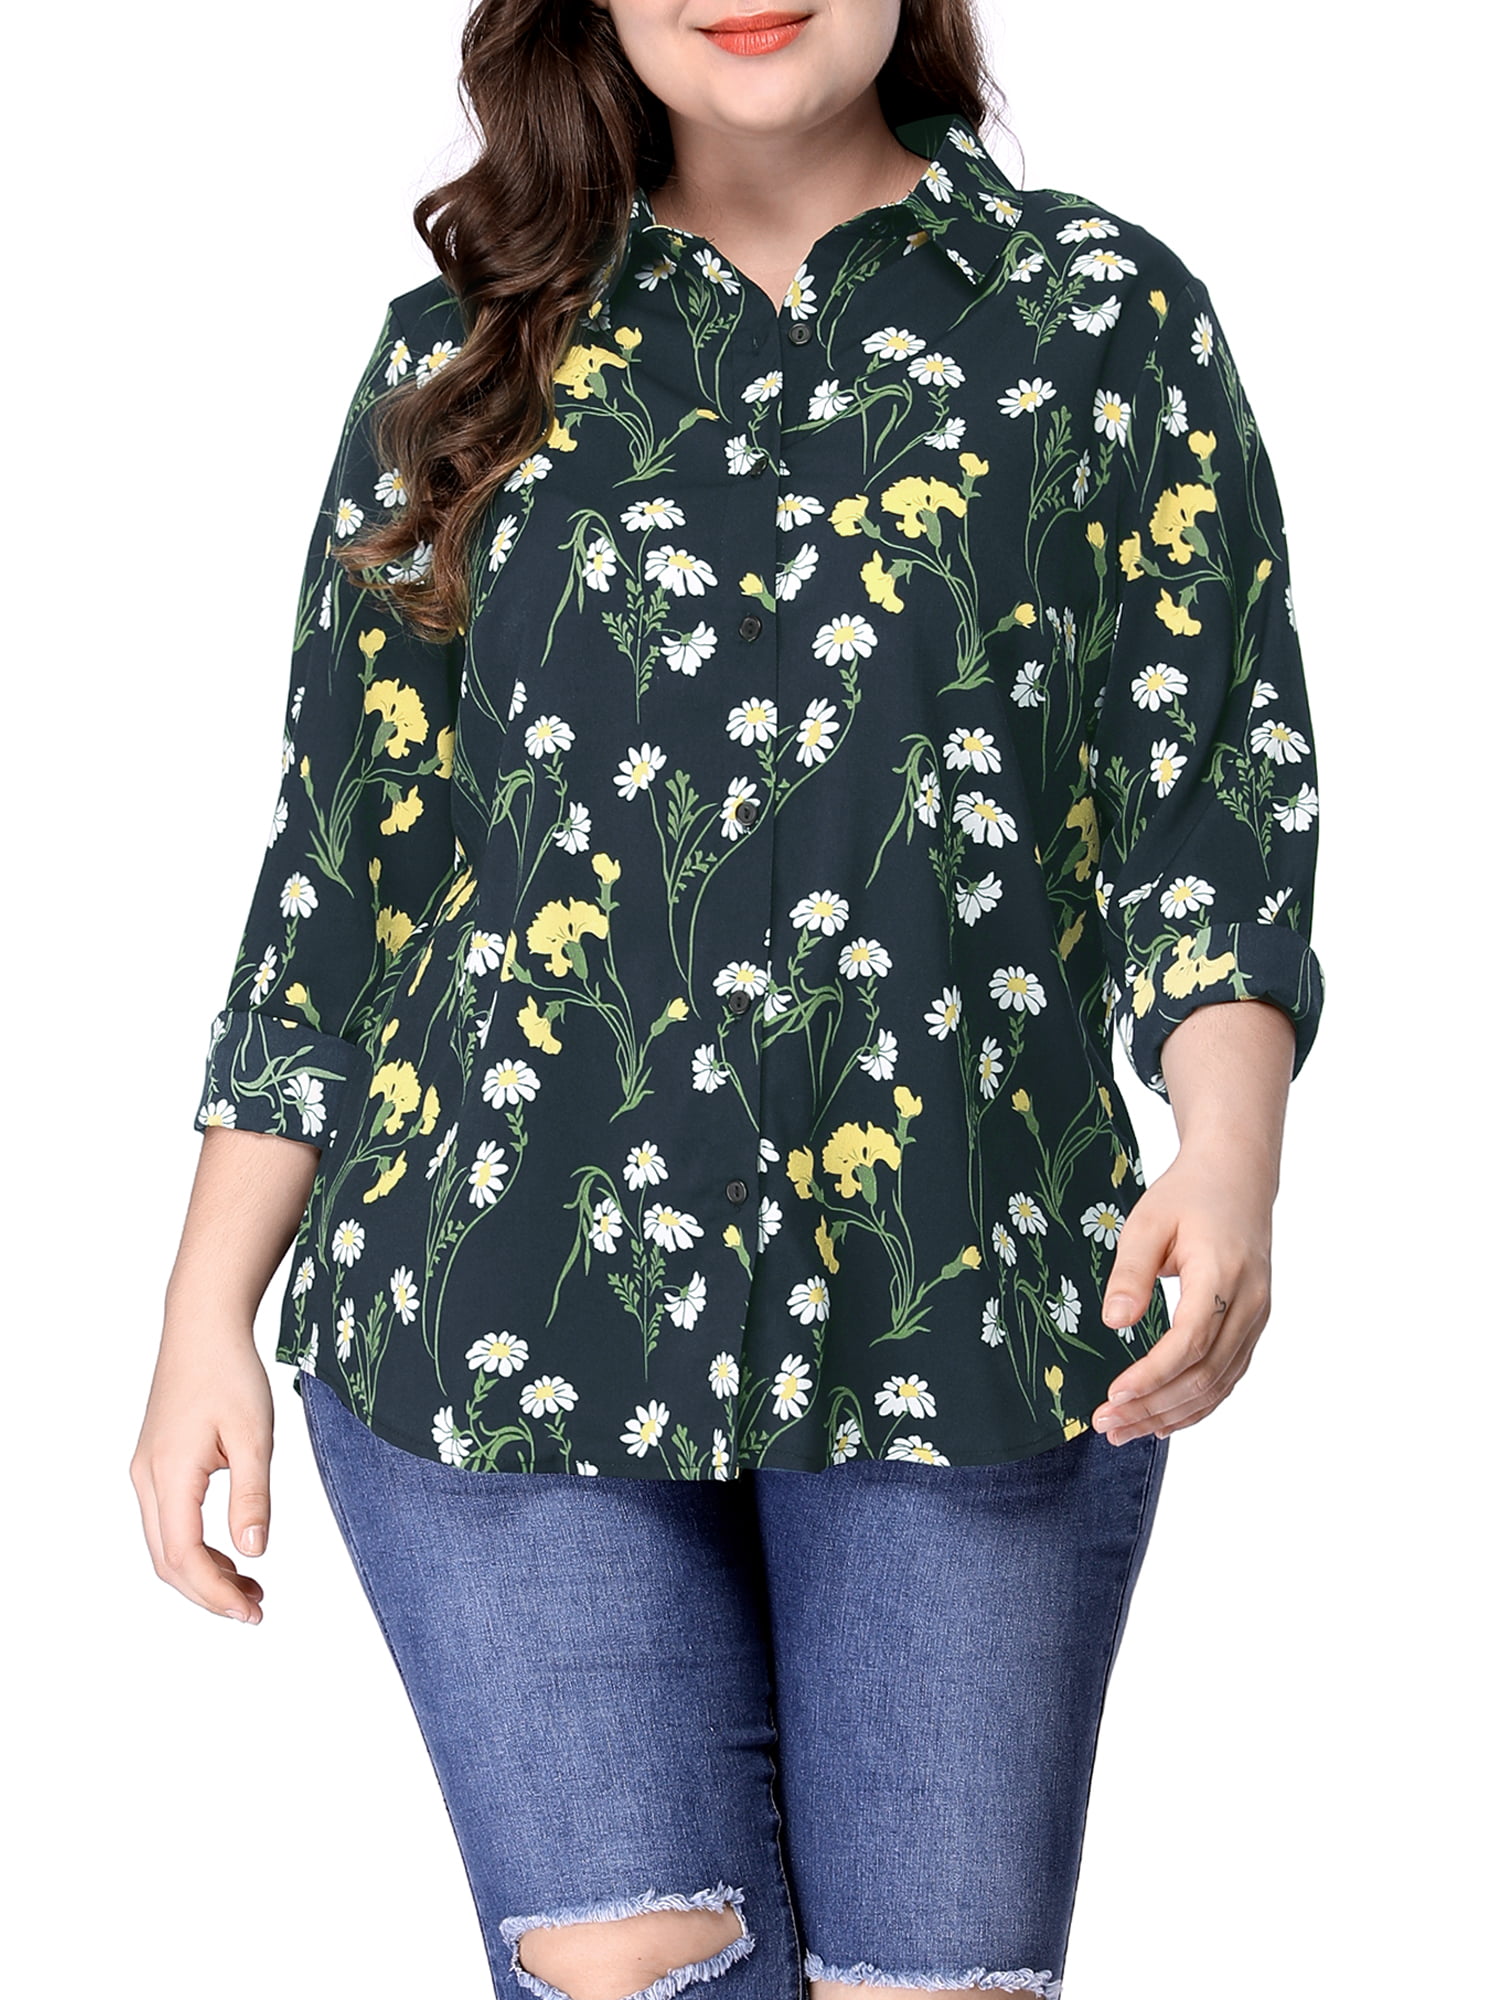 Long Sleeve Tee Blouse Women,Amiley Women Floral Print Button Down Cardigan Plus Size T Shirts Casual Blouse Tops with Pocket 